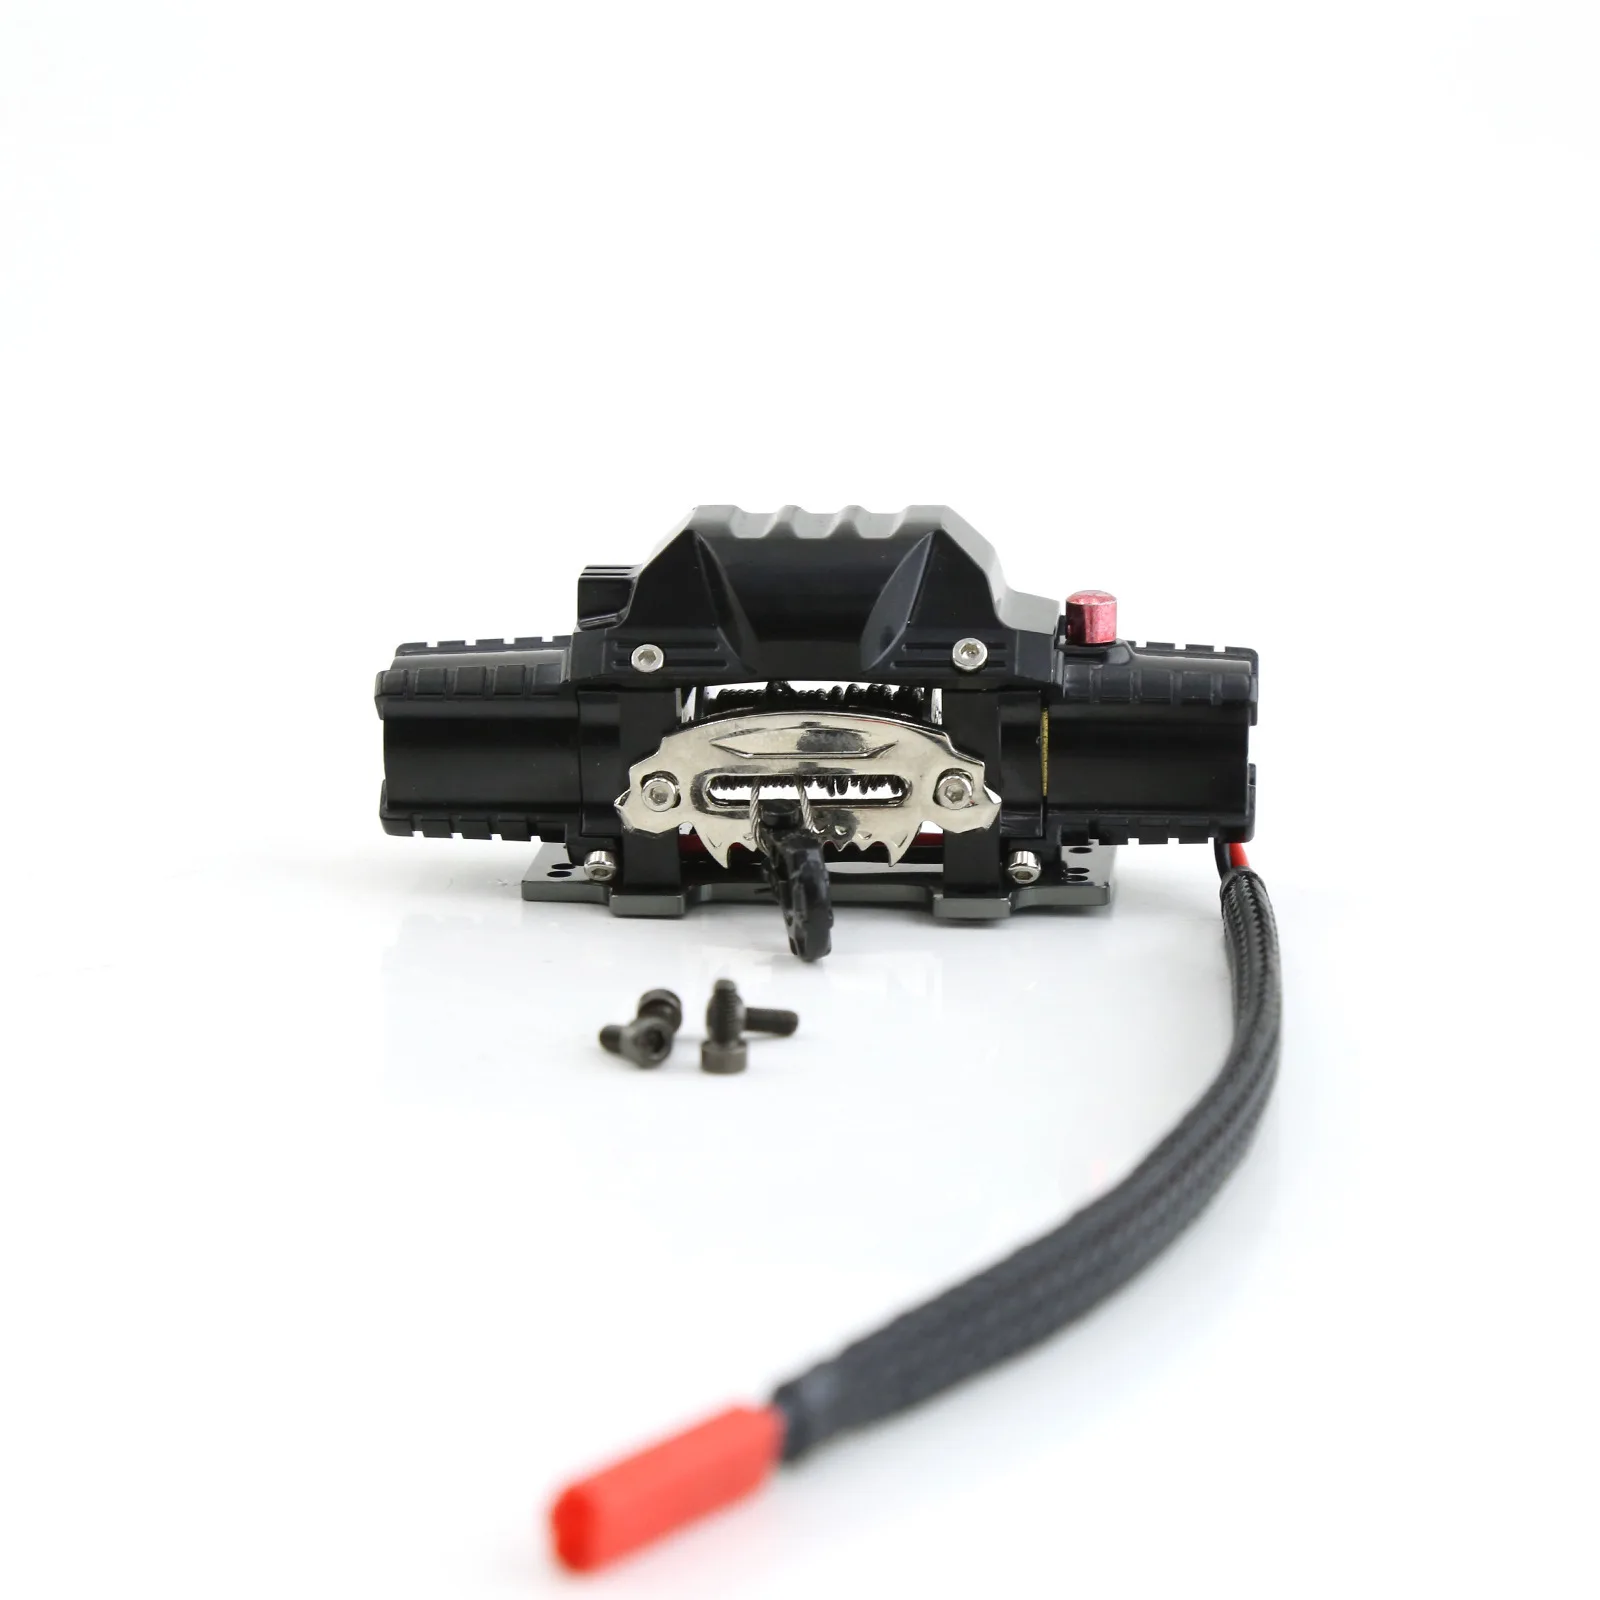 

Metal Automatic simulation Simulated Winch for 1/10 1/8 RC Crawler Car Axial SCX10 III 90046 D90 TRX4 TRX-6 D110 90046 Redcat